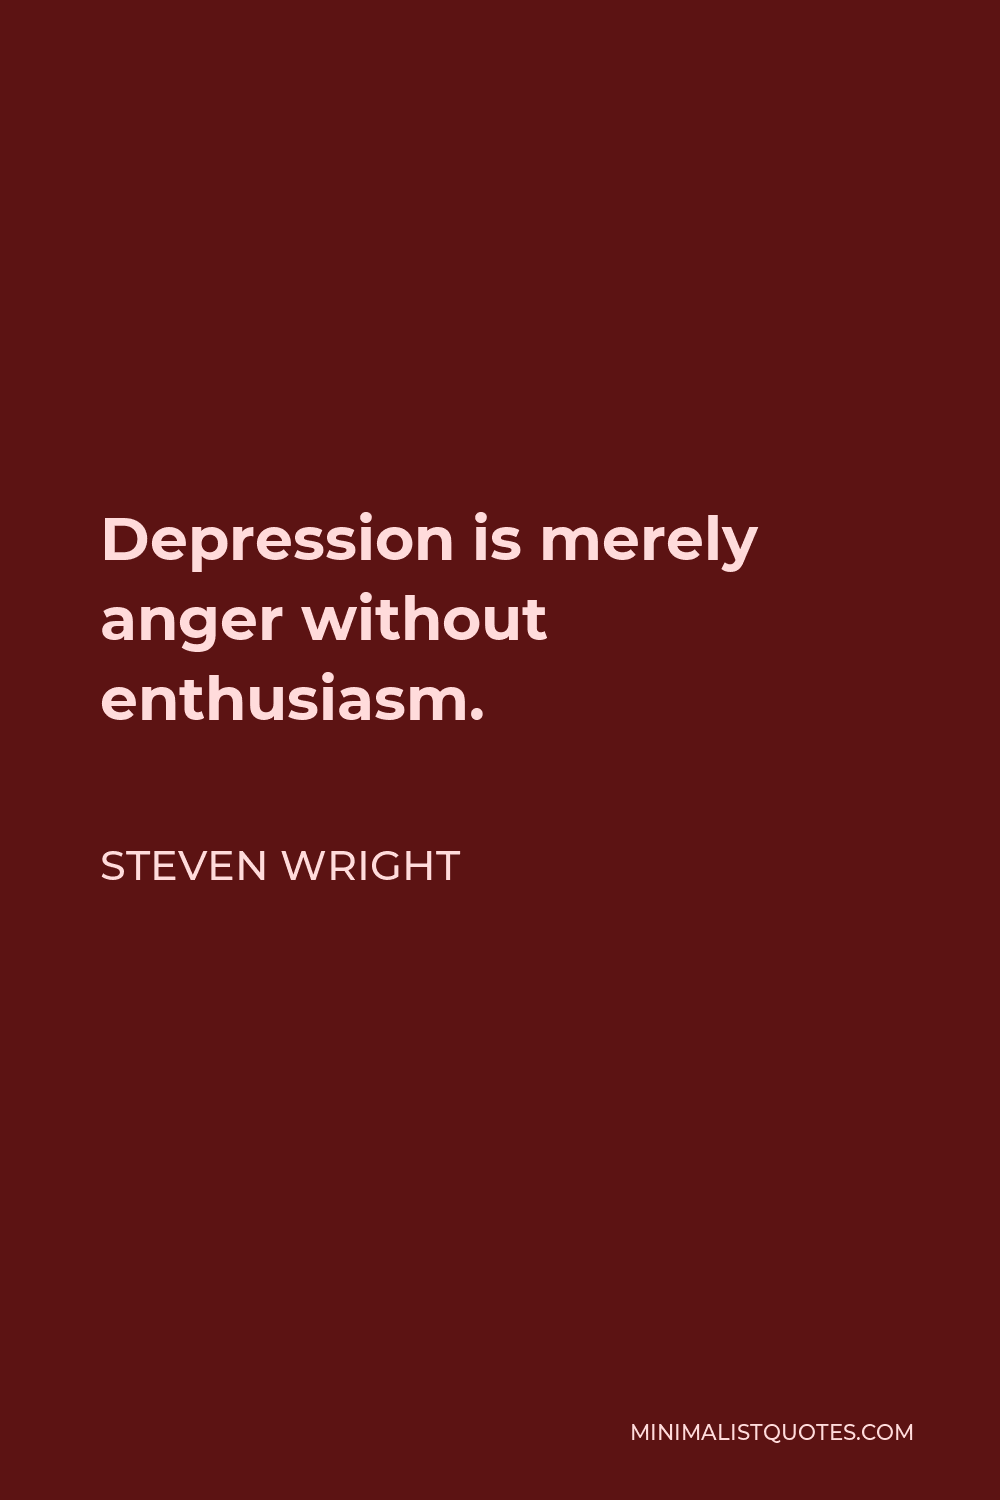 Steven Wright Quote - Depression is merely anger without enthusiasm.